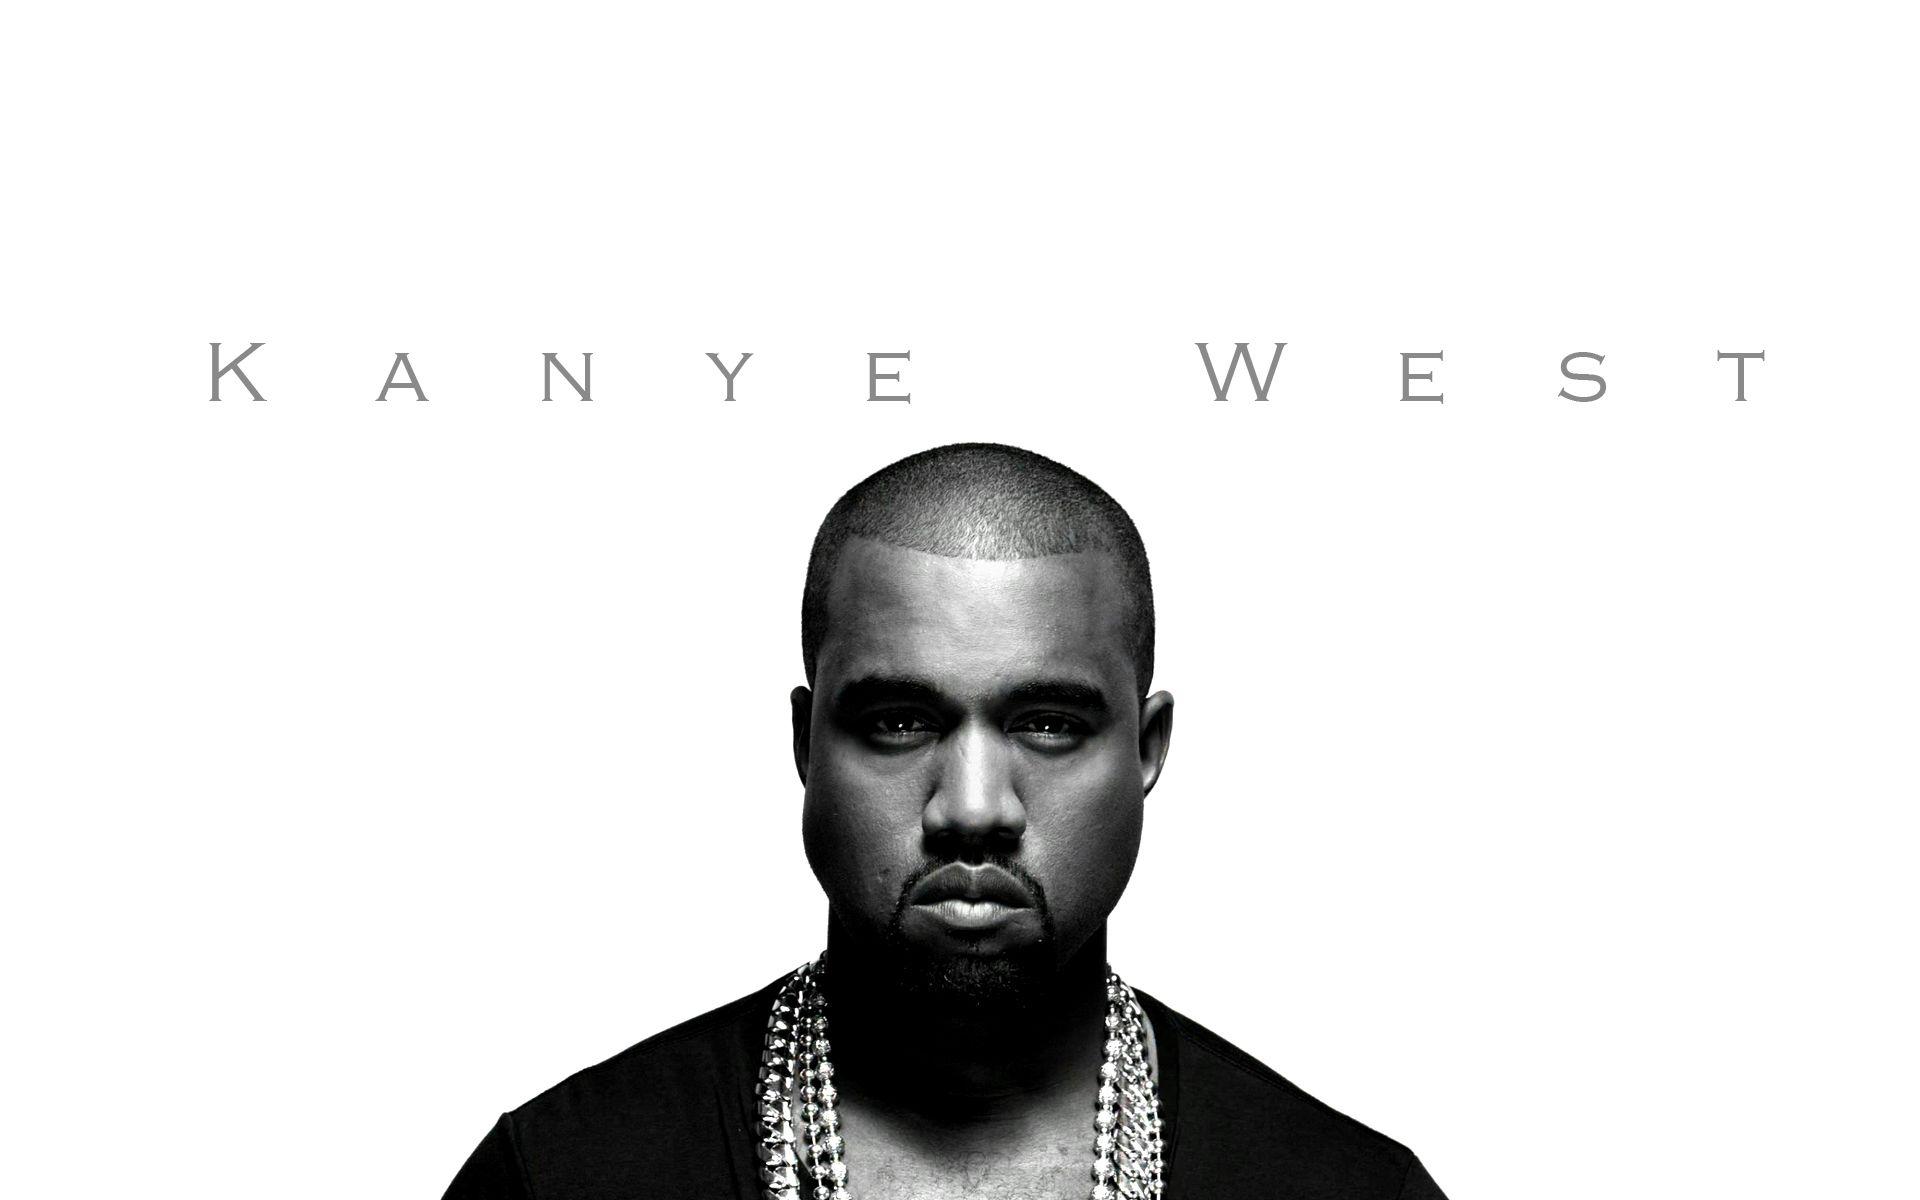 Kanye West Wallpaper High Resolution and Quality Download